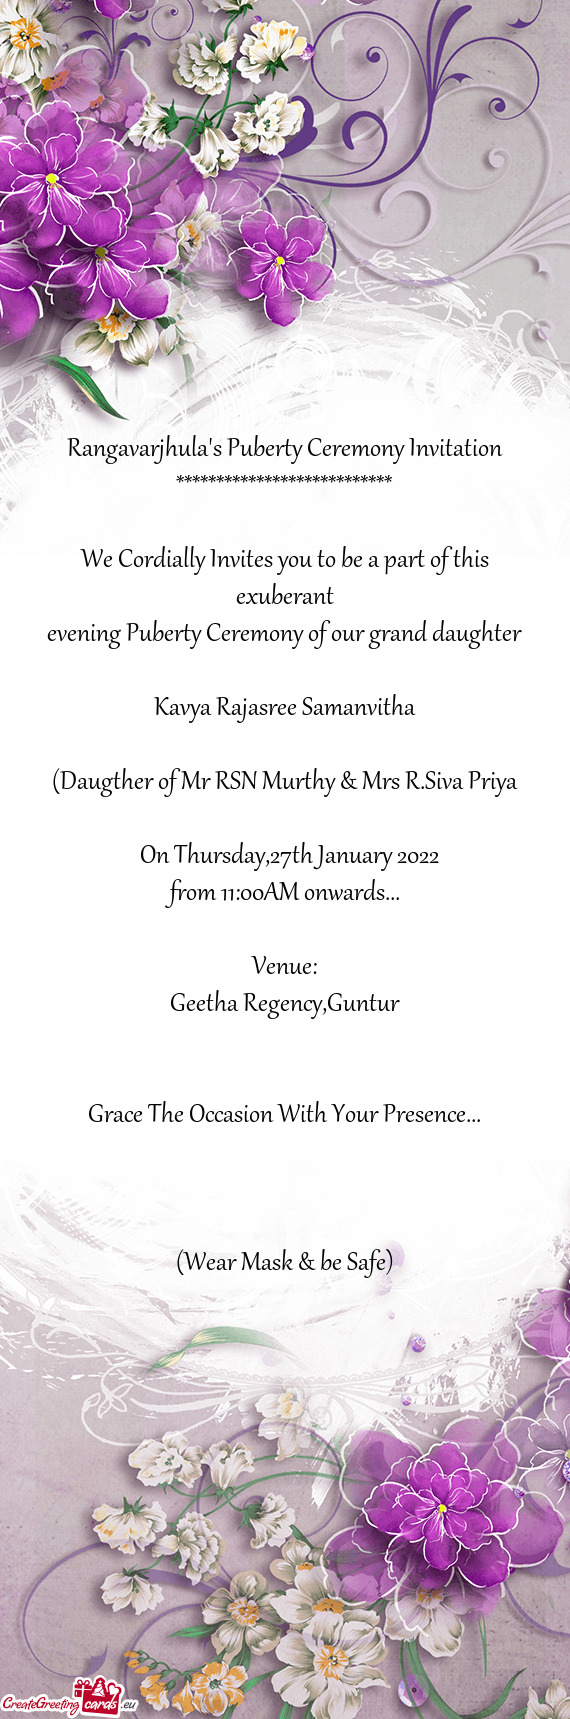 Evening Puberty Ceremony of our grand daughter